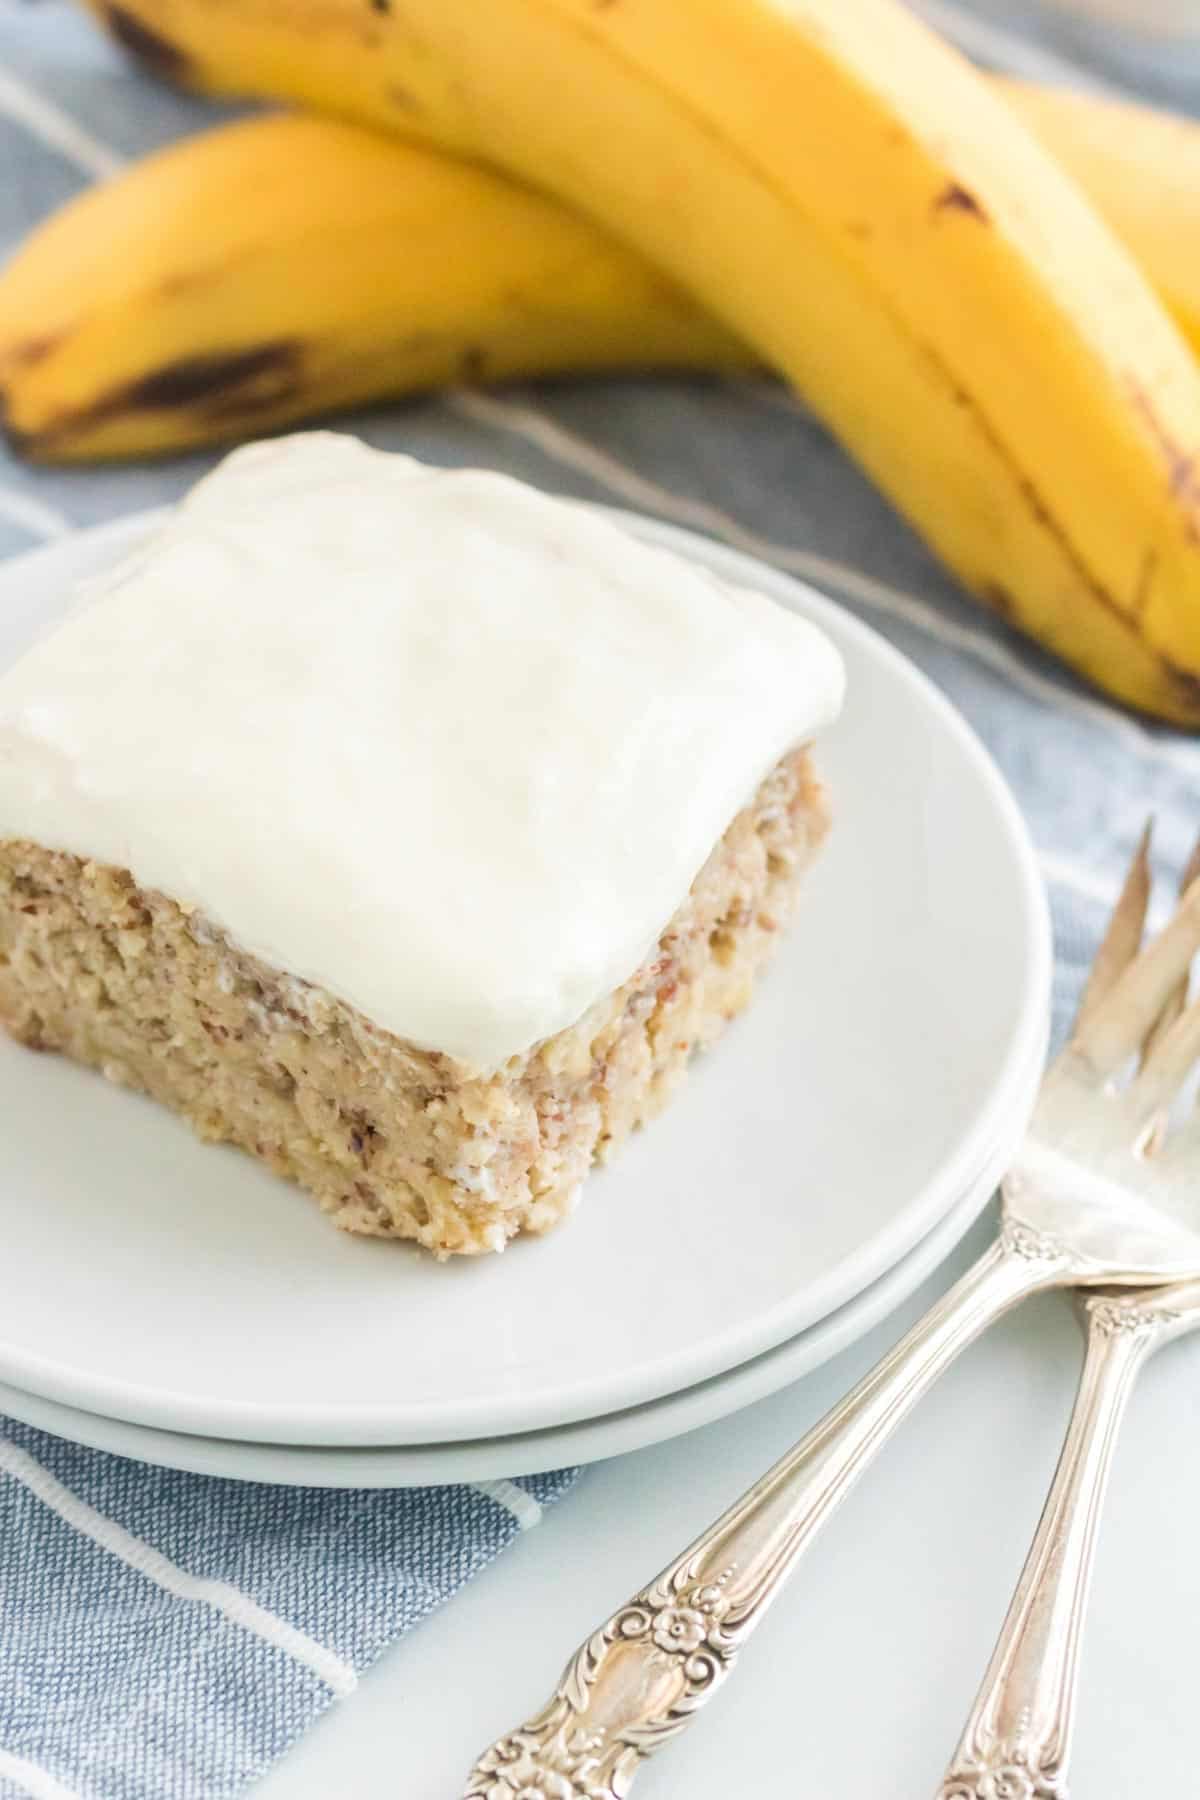 A piece of frosted cake on a plate with two bananas in the background